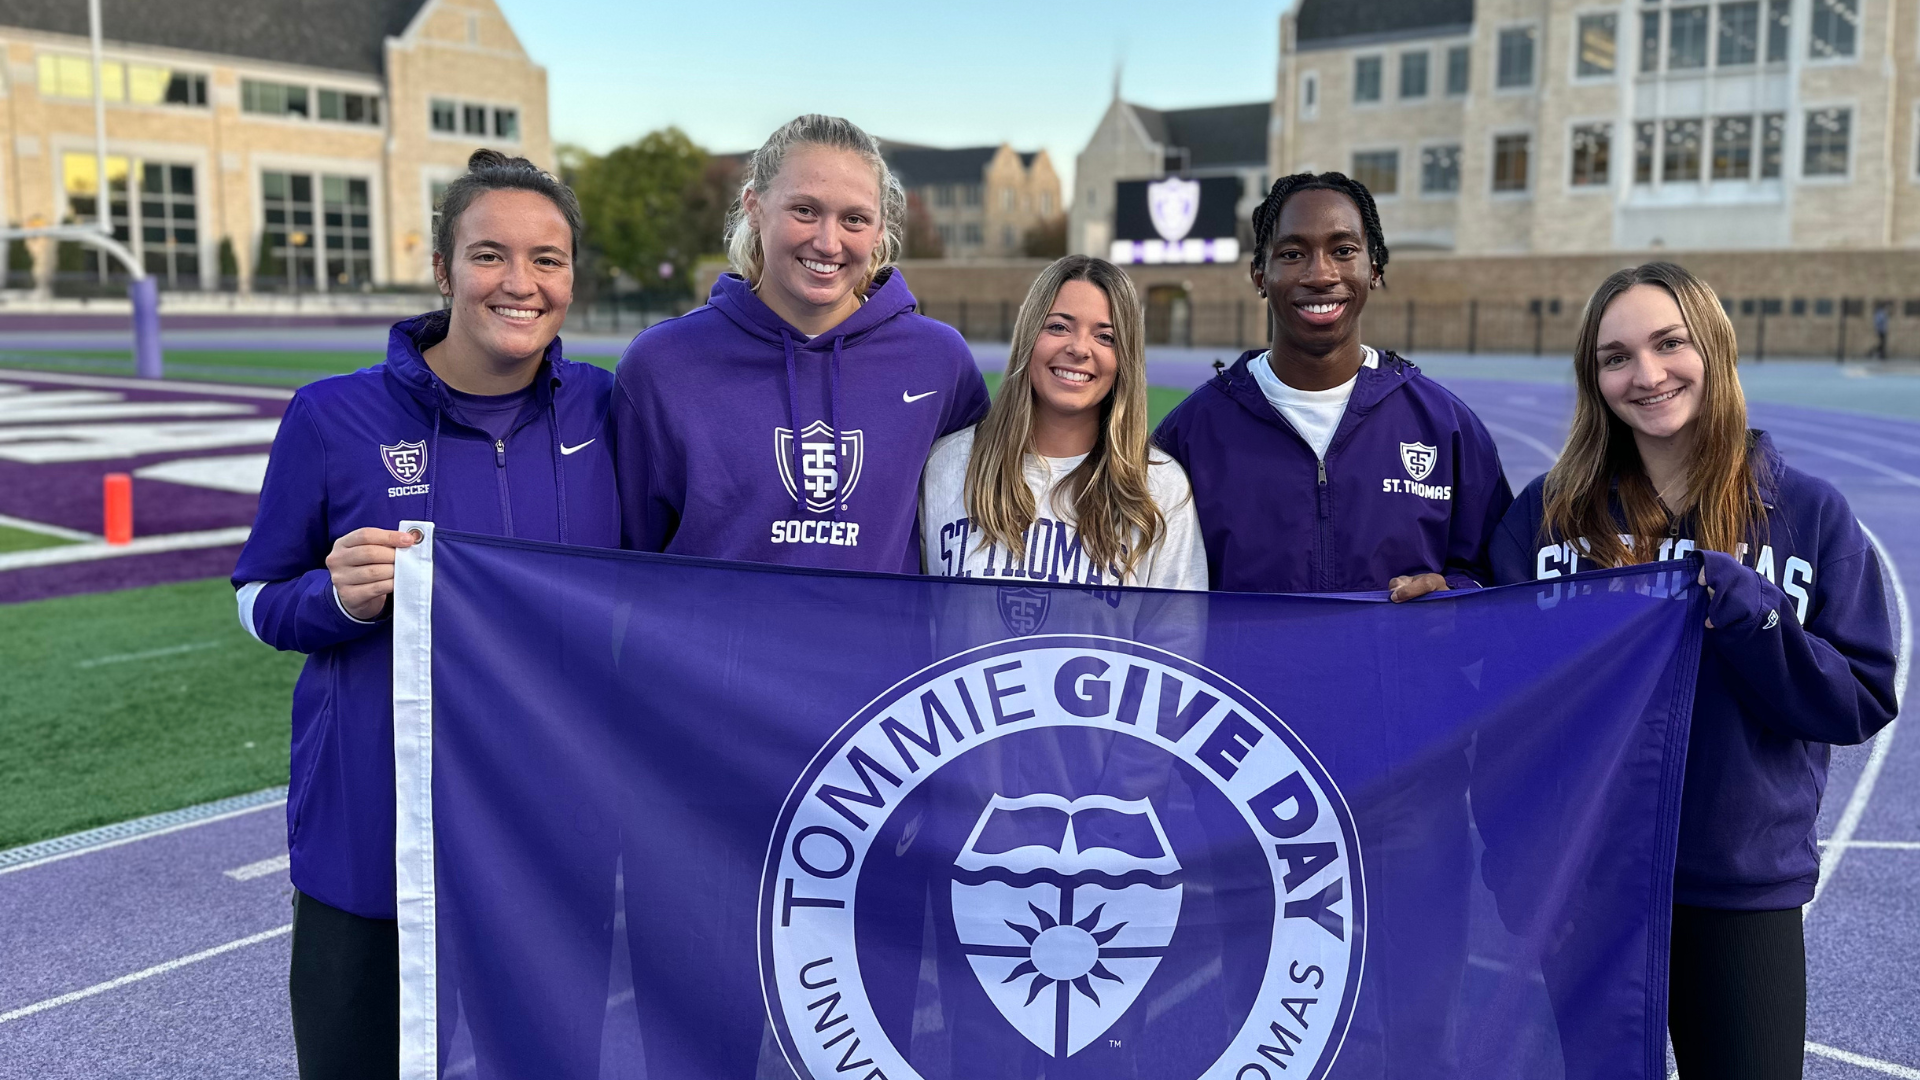 Students standing together holding Tommie Give Day flag